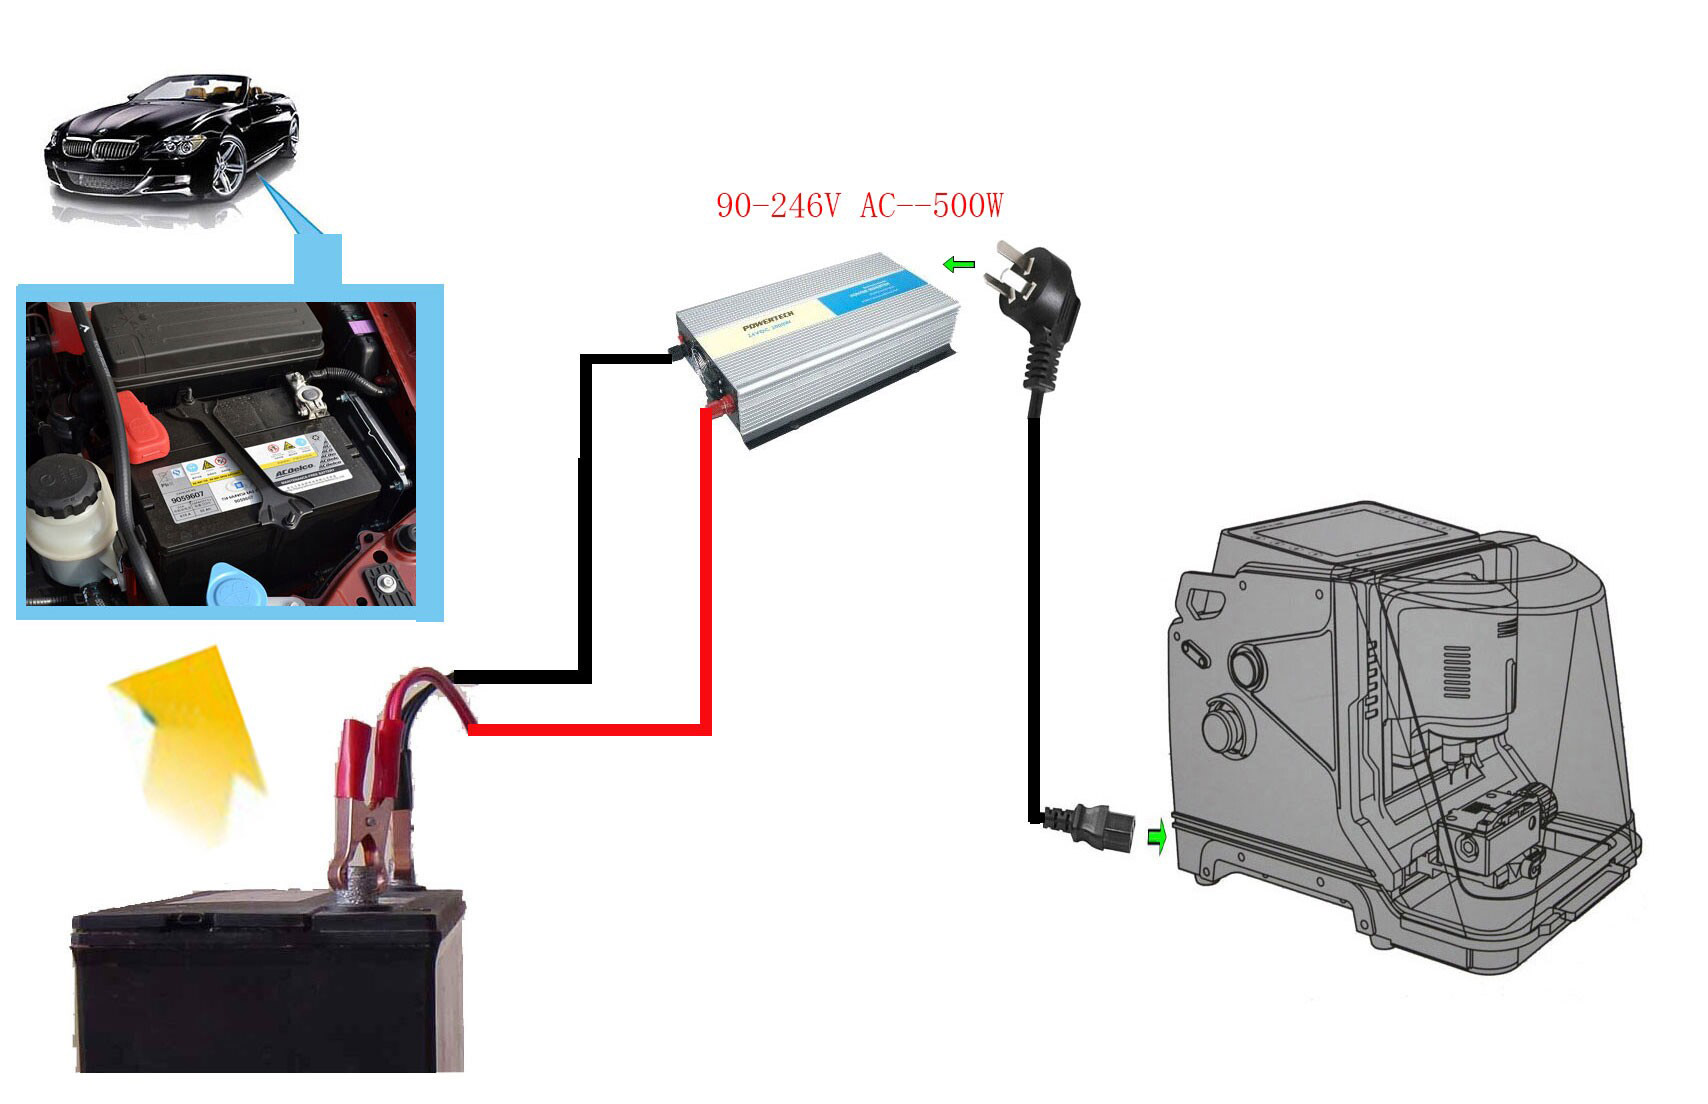 ikeycutter-condor-xc-mini-connection-obd365